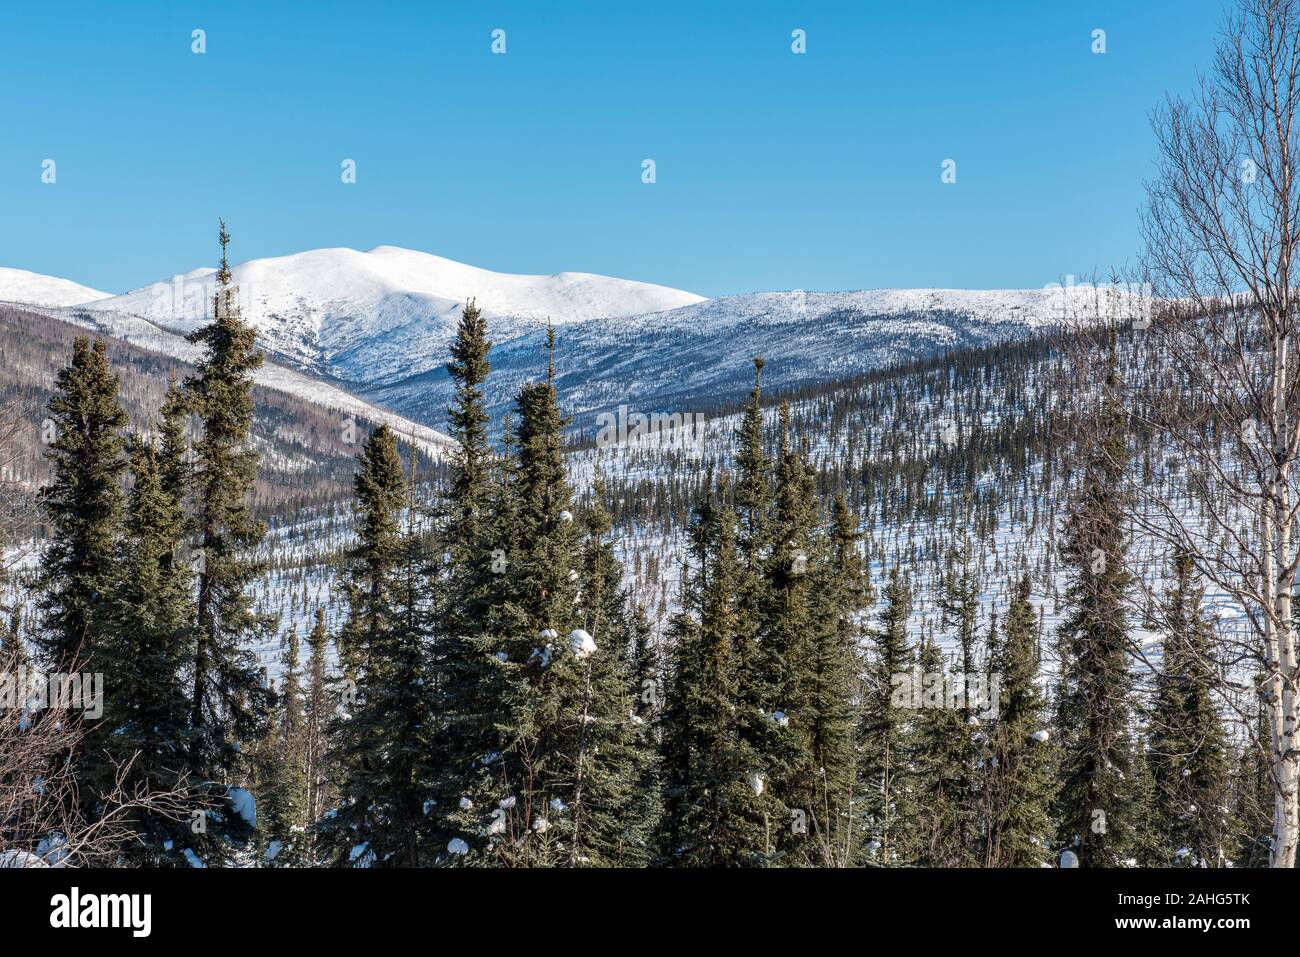 Winter landscape view of forest and mountains near Fairbanks, Alaska Stock Photo